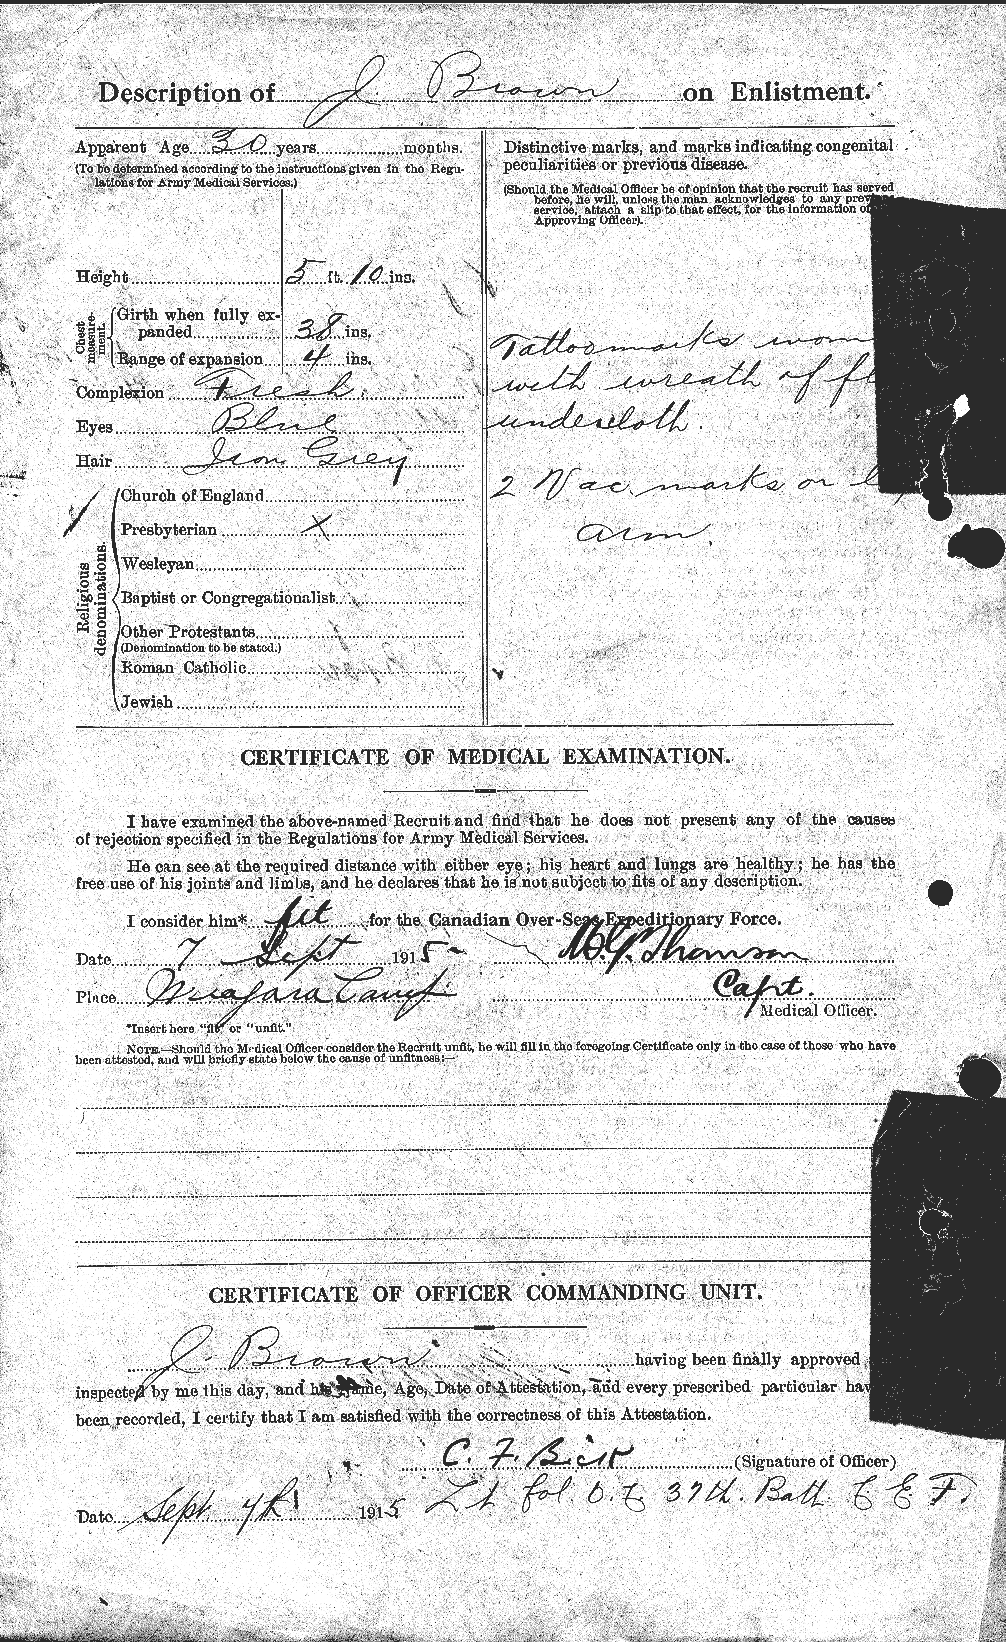 Personnel Records of the First World War - CEF 263874b